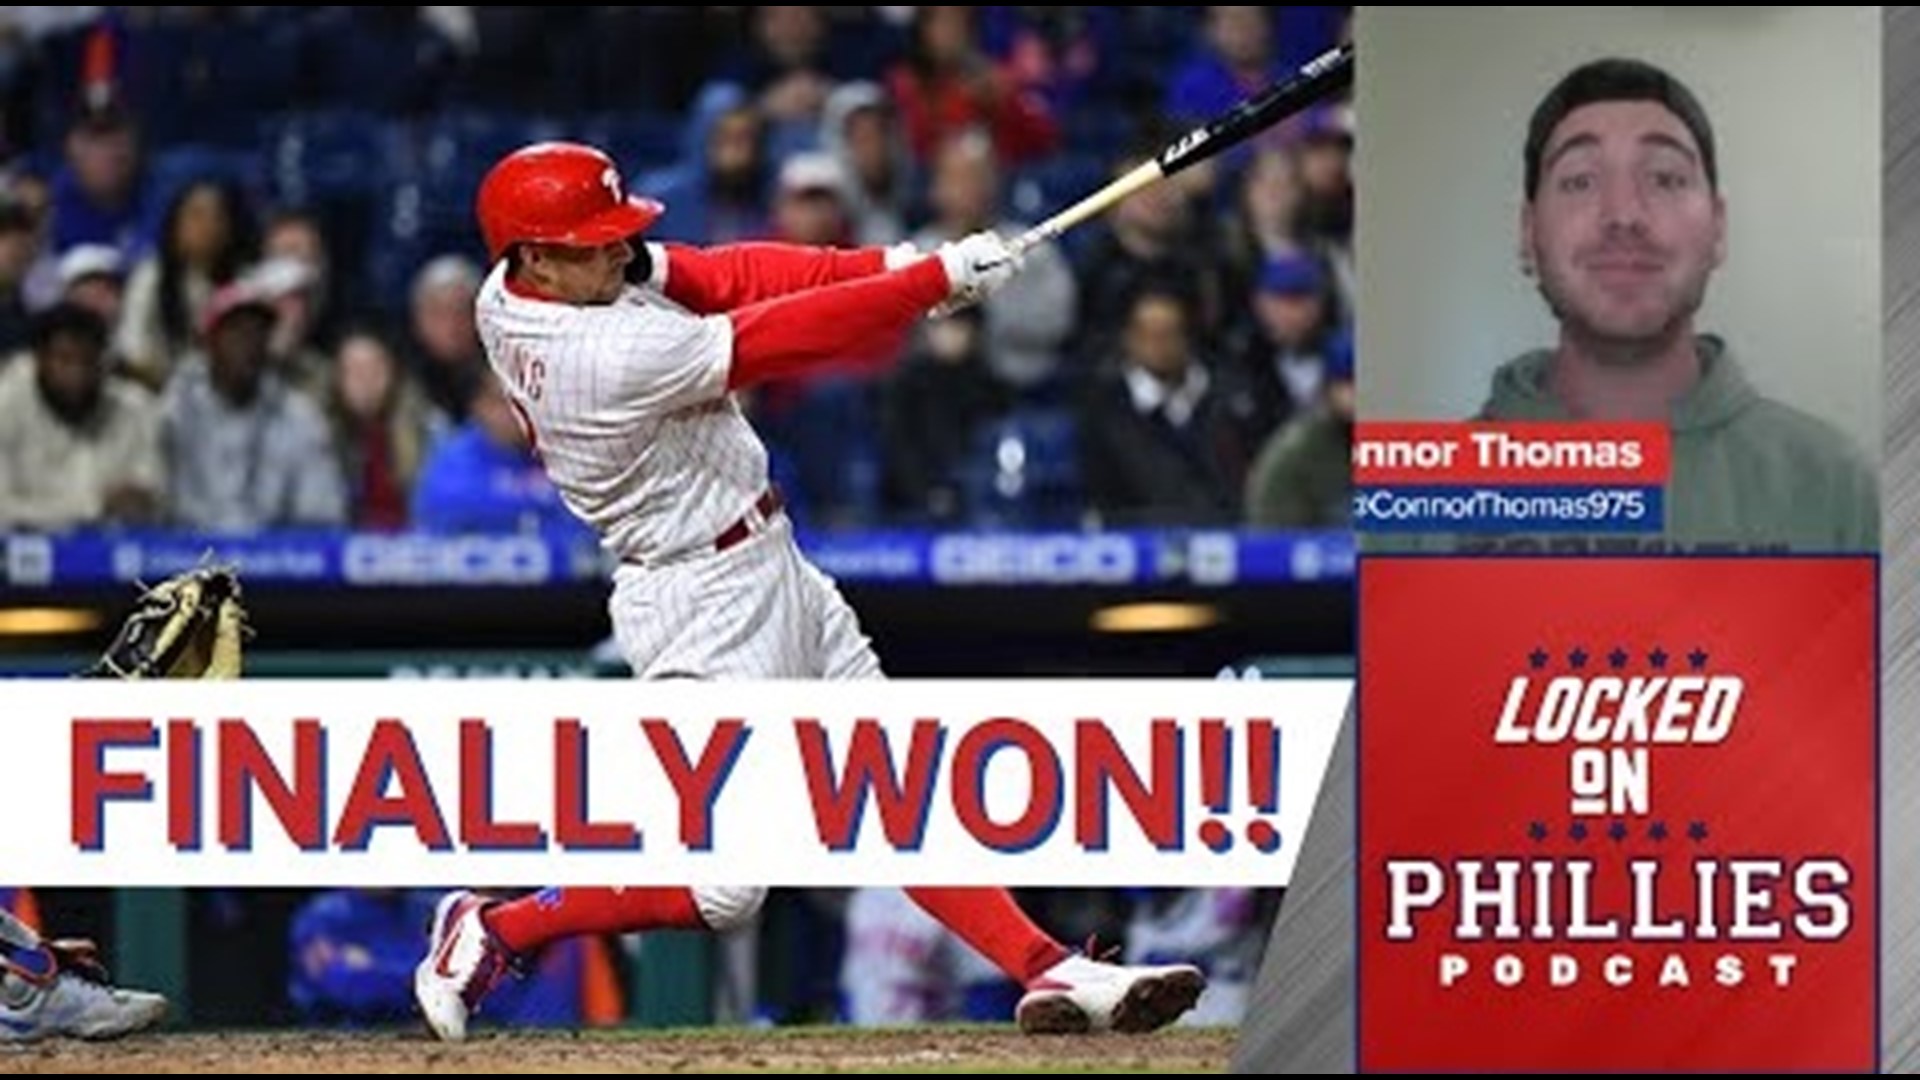 Connor discusses the end to the Philadelphia Phillies' 5 game losing streak with a win over the Washington Nationals in Game 1 of what was supposed to be a twin bill